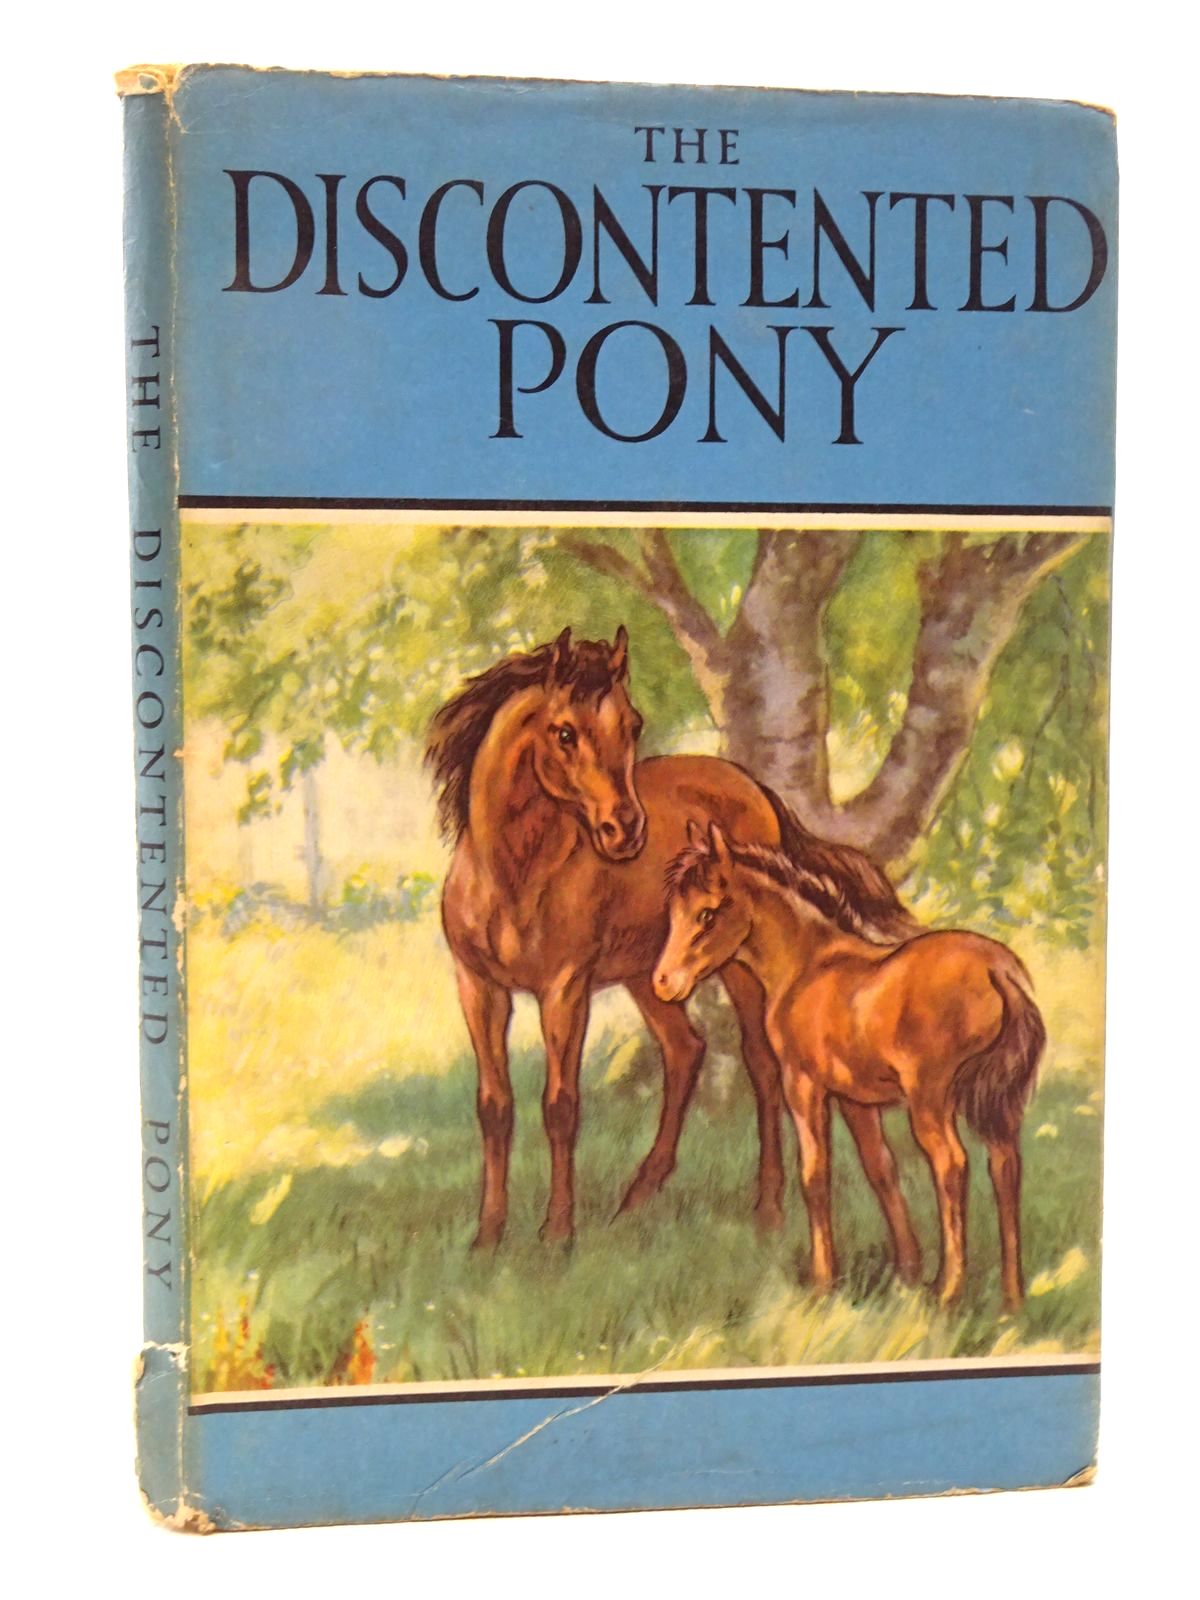 Photo of THE DISCONTENTED PONY written by Barr, Noel illustrated by Hickling, P.B. published by Wills & Hepworth Ltd. (STOCK CODE: 2124337)  for sale by Stella & Rose's Books